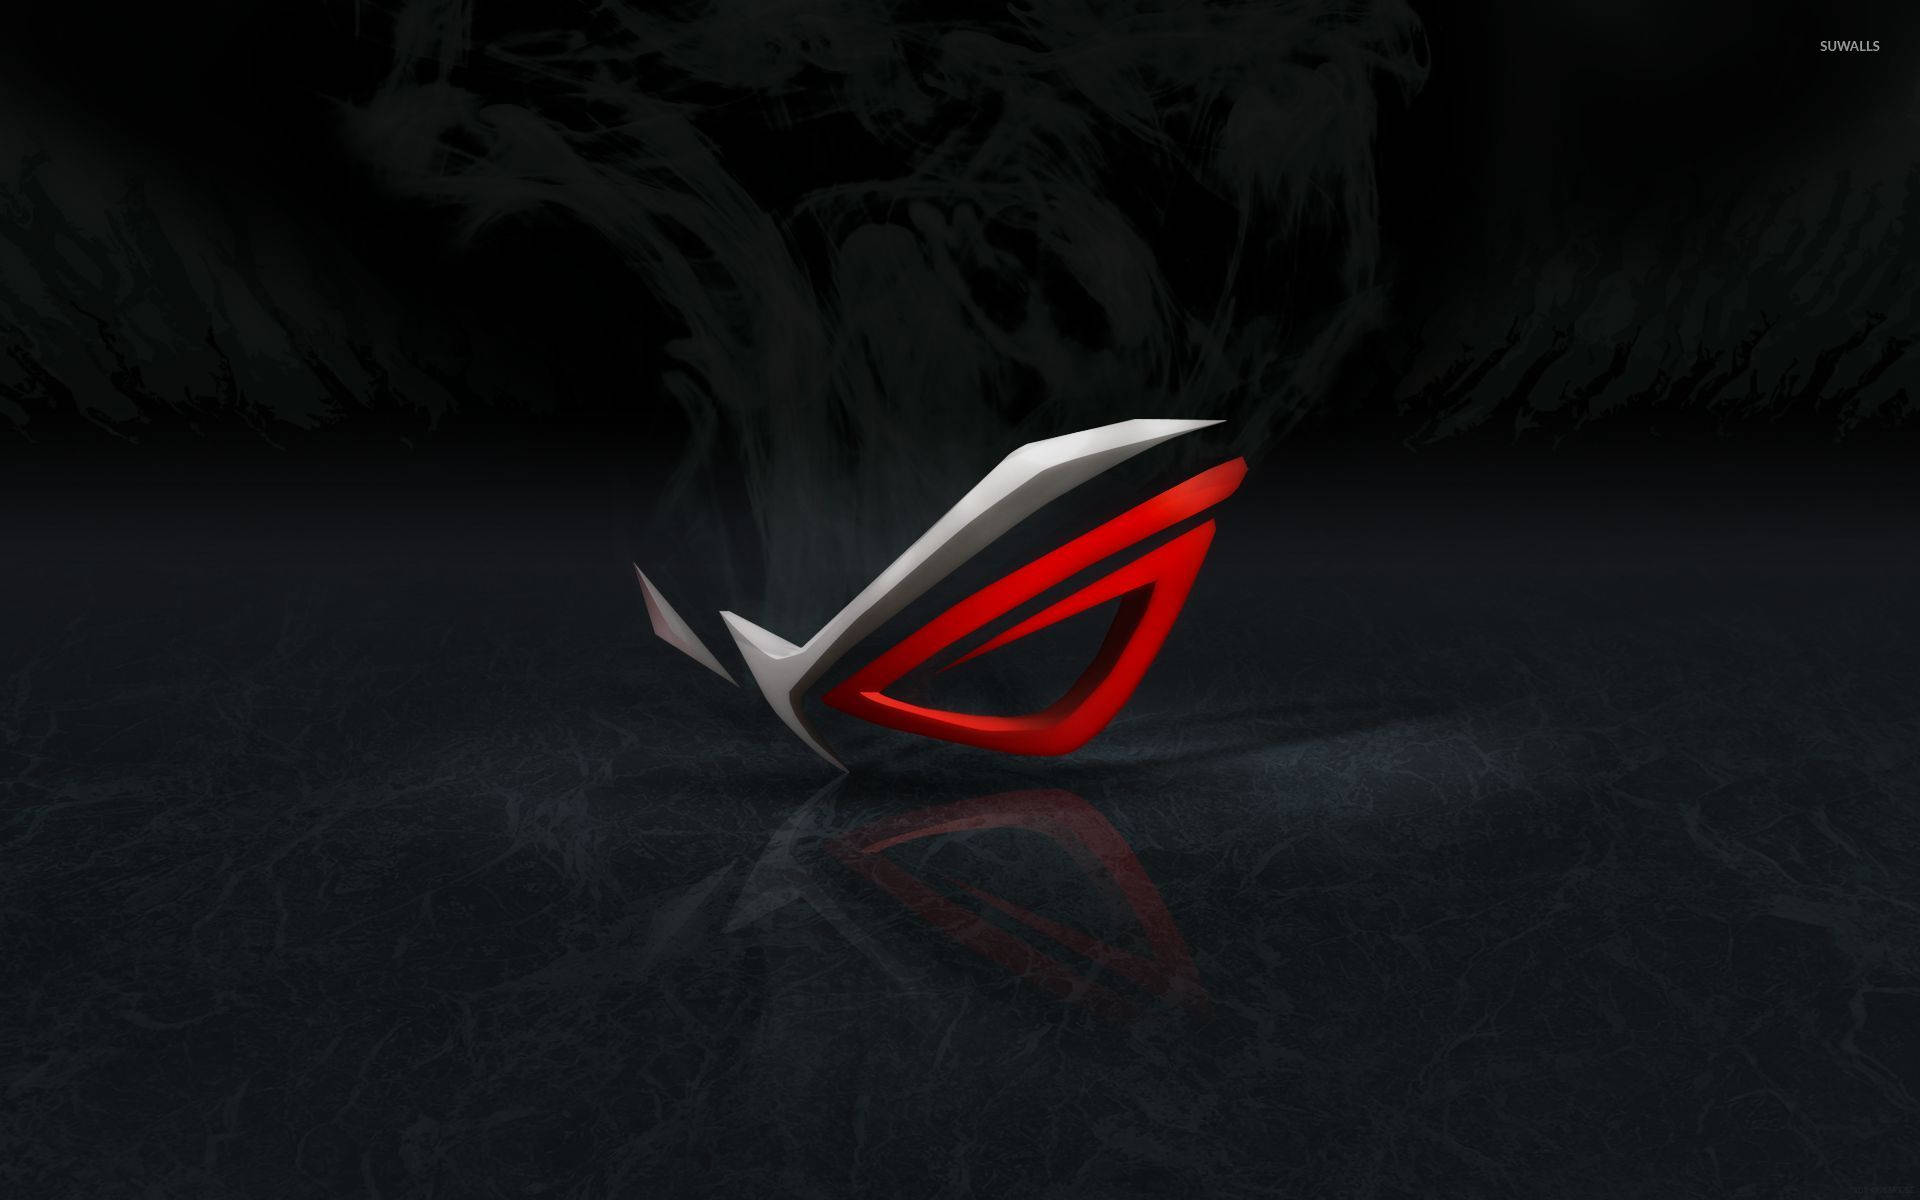 Dive into the World of Gaming with Asus ROG Wallpaper